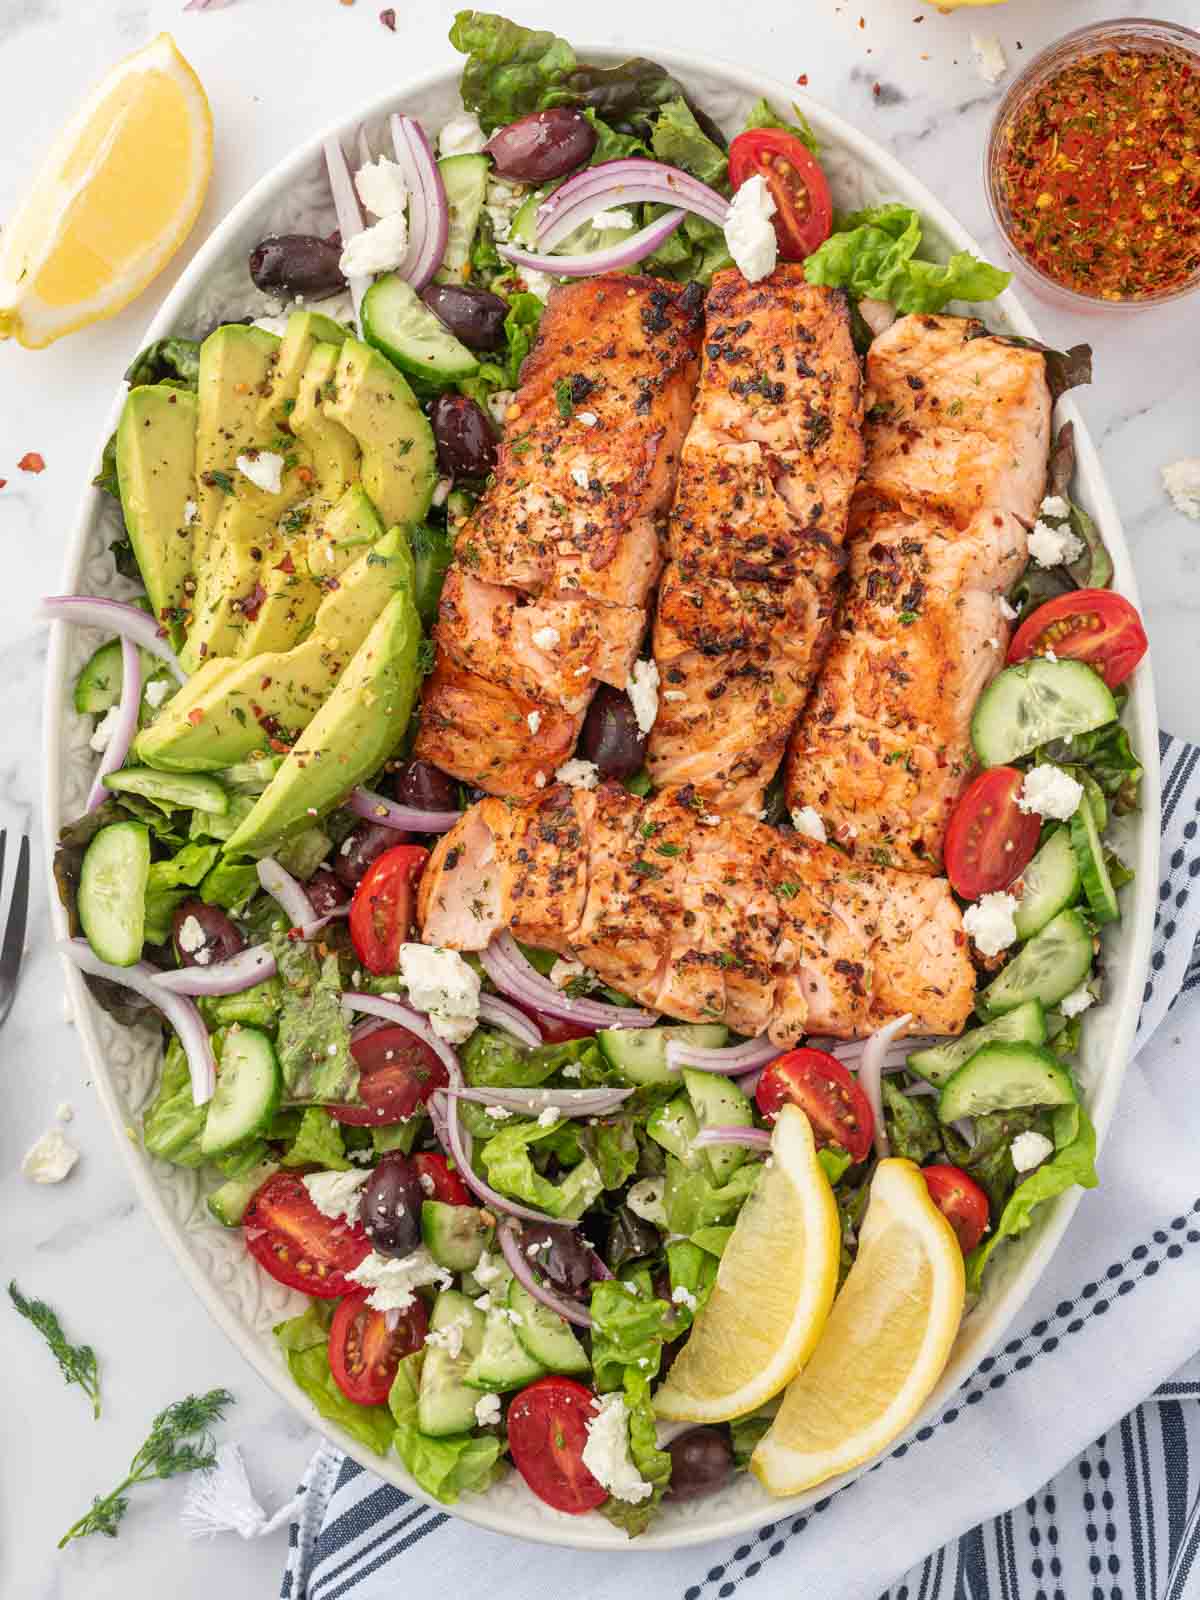 Grilled salmon salad on a platter.